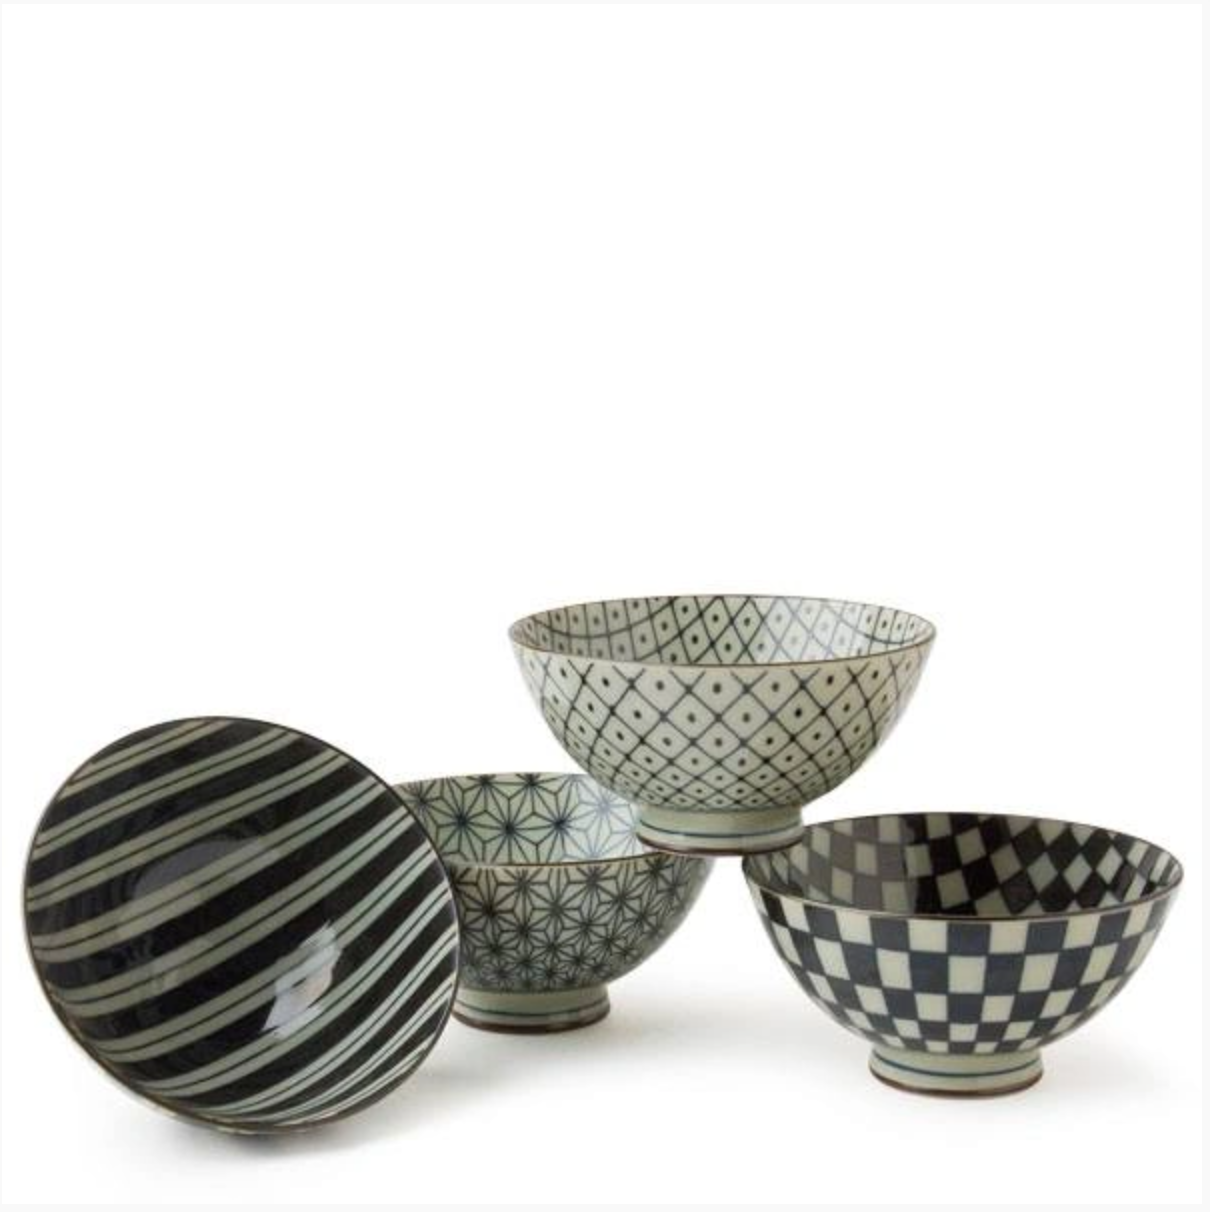 Vintage Inspired Small Bowls, Set of 4